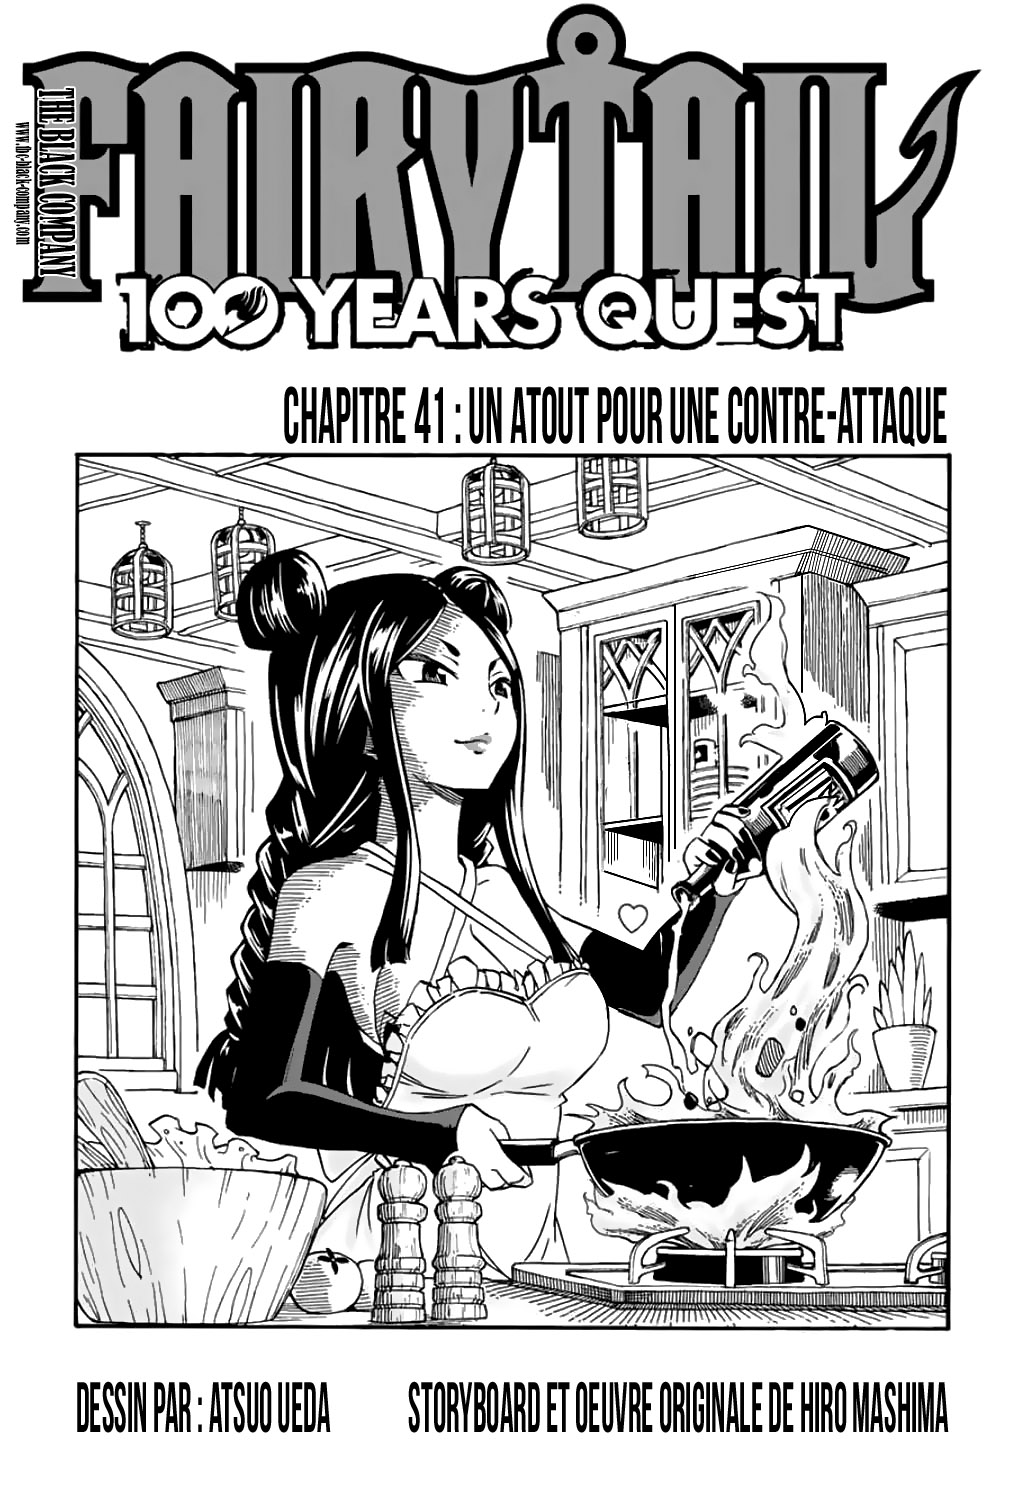 Fairy Tail 100 Years Quest: Chapter 41 - Page 1